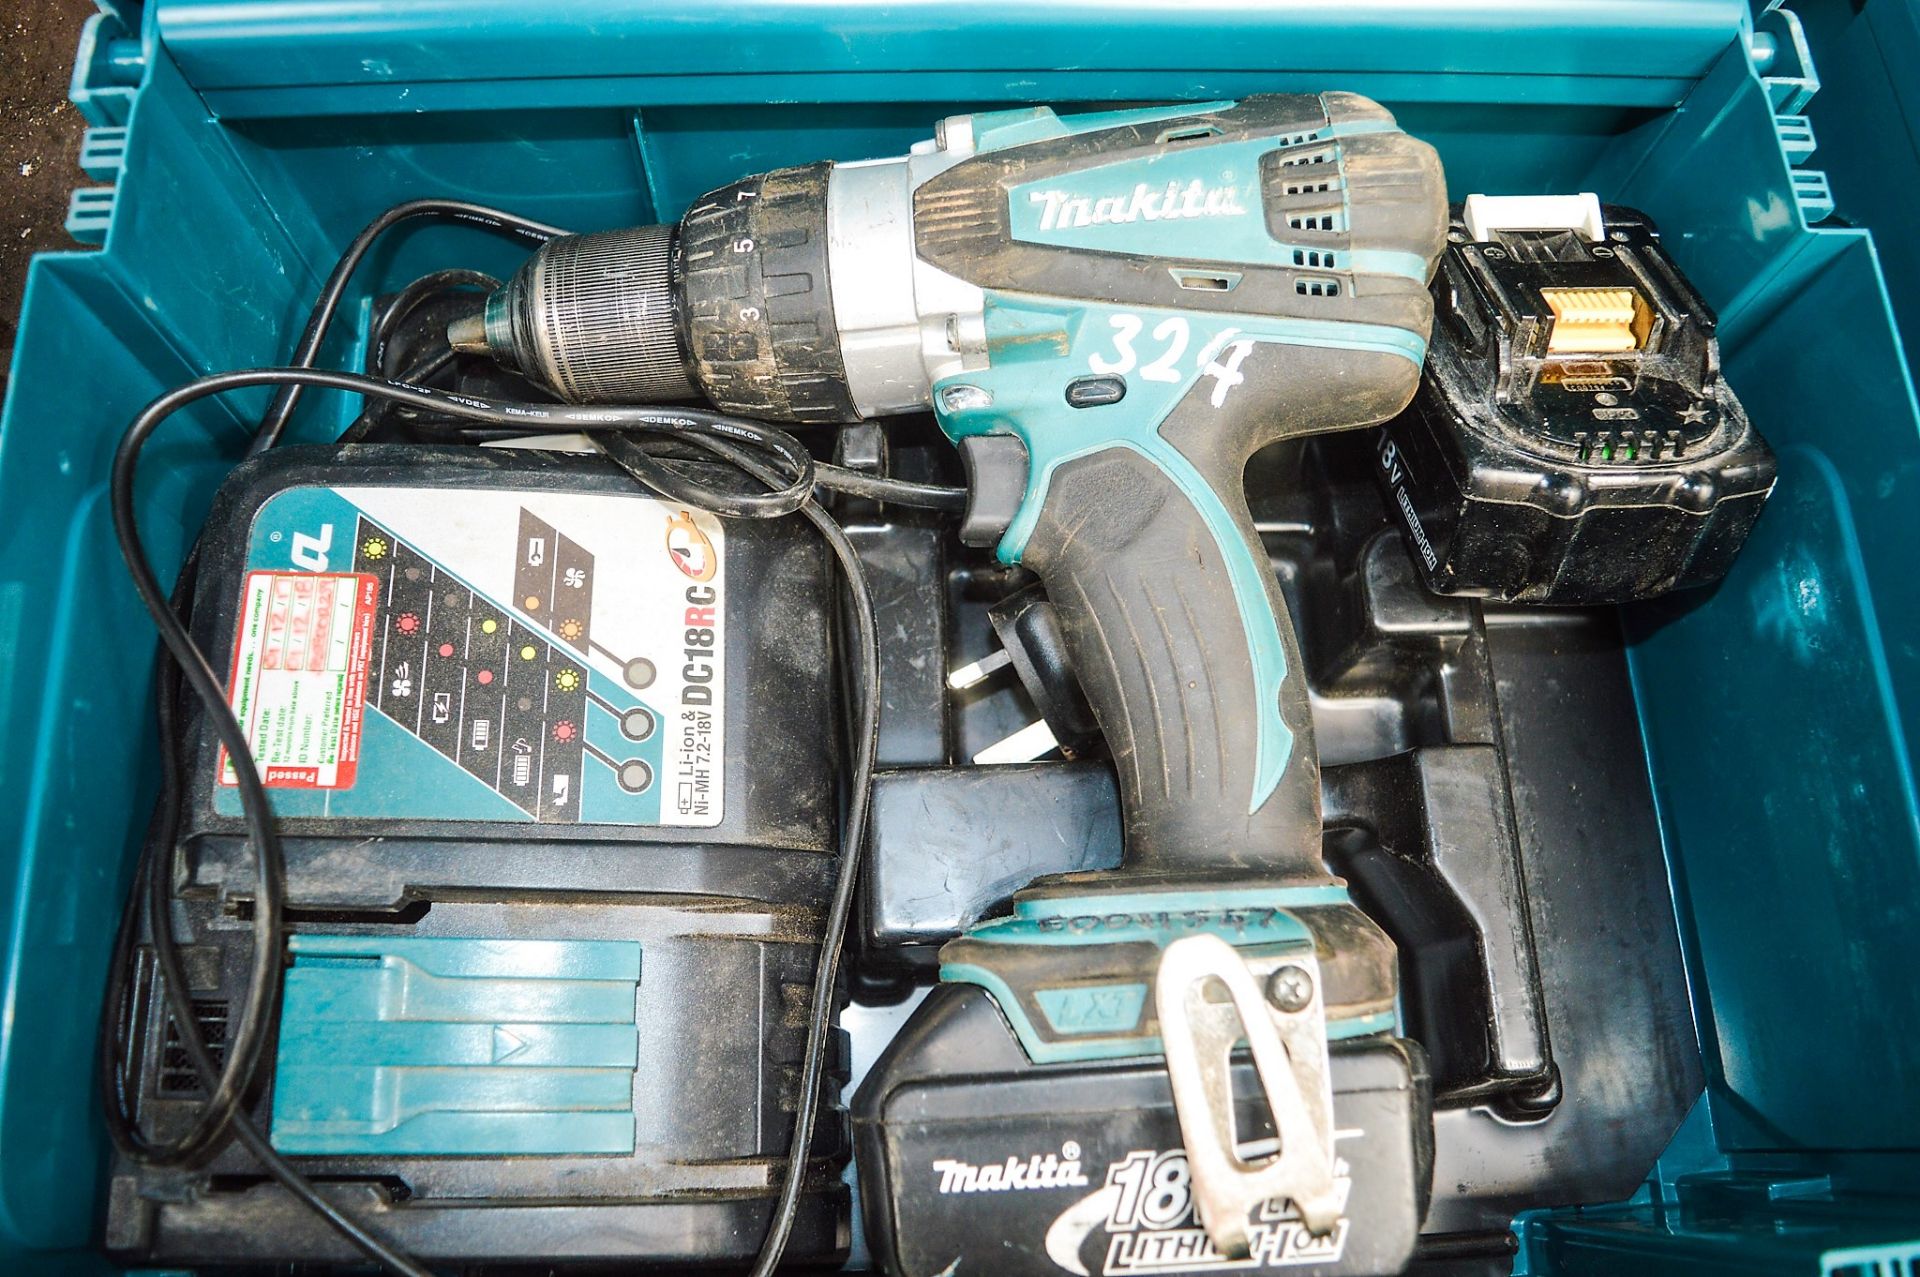 Makita 18v cordless power drill c/w charger, 2 batteries & carry case E0011547